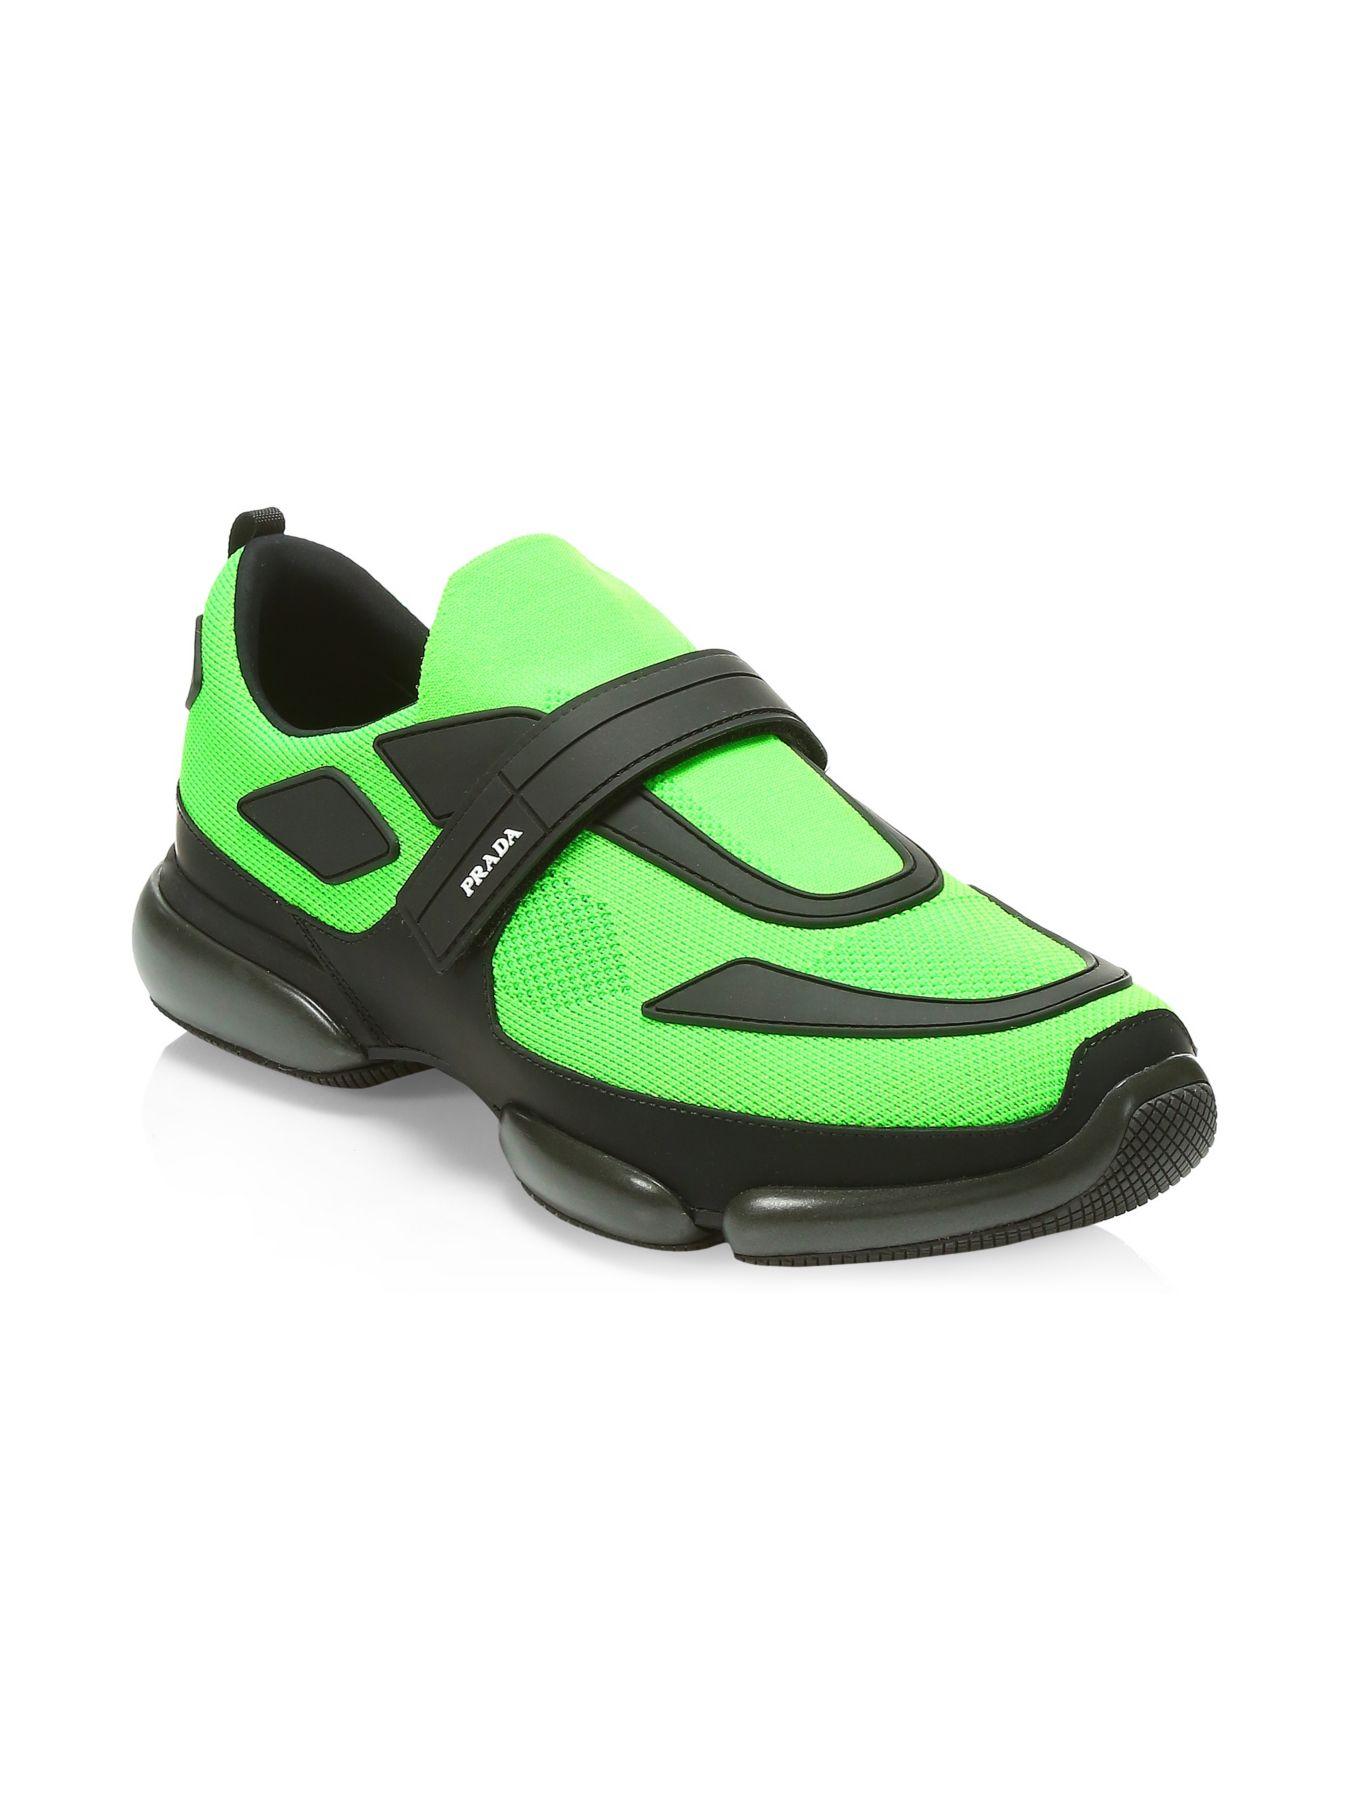 Prada Leather Black And Green Cloudbust Sneakers for Men - Lyst